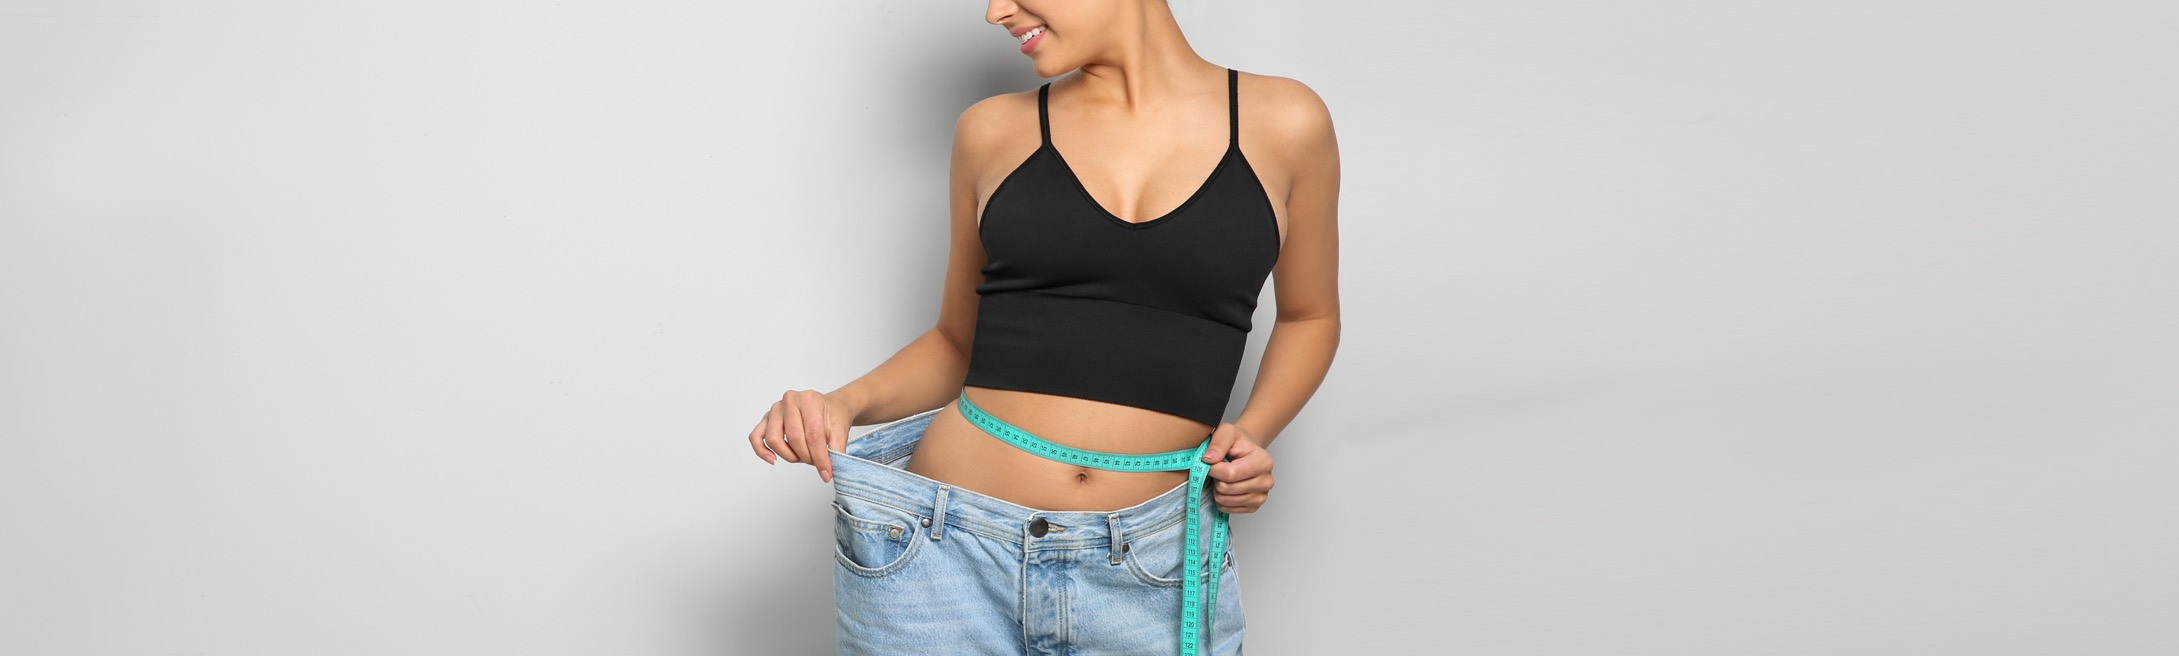 4 Amazing Benefits of Evolve’s Medical Weight Loss Program